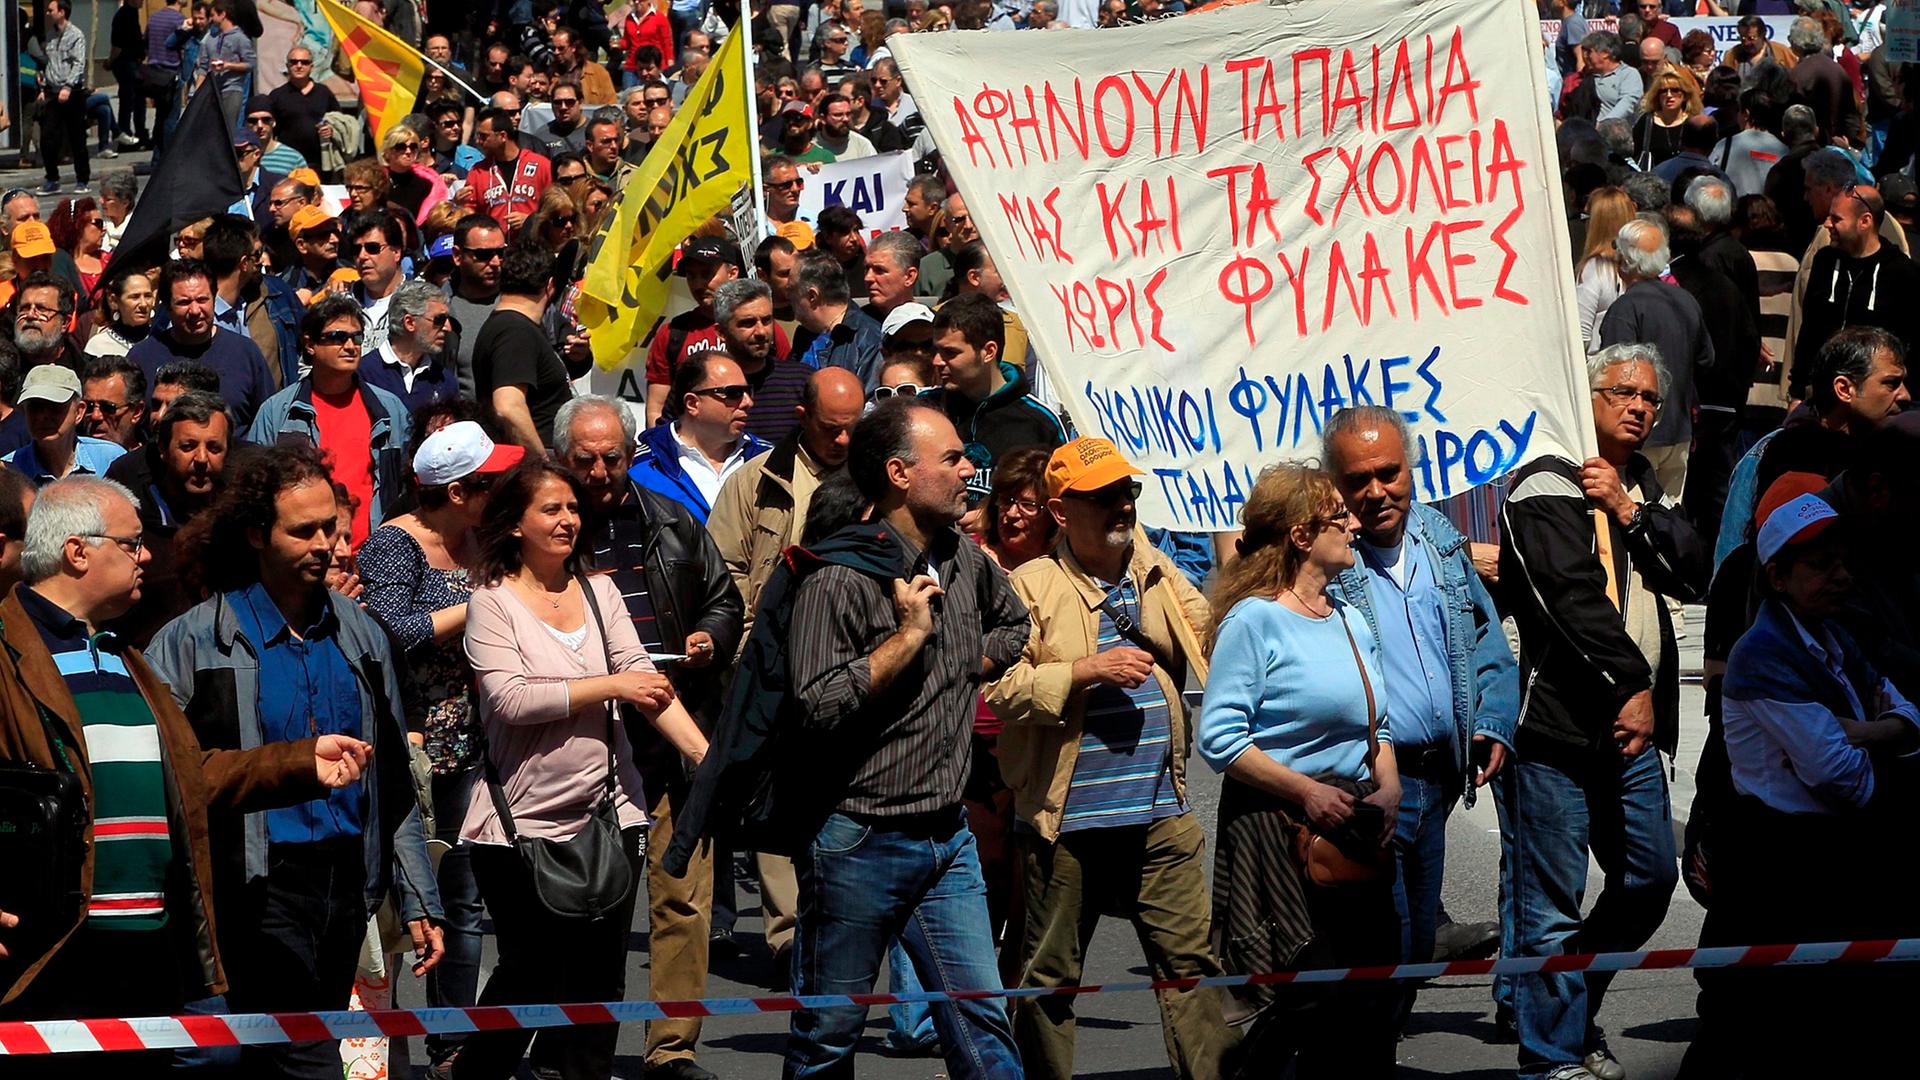 epa04160293 Protesters shout slogans during a general strike outside of the Greek Parliament in Athens, Greece, 09 April 2014. Greece's two largest public and private sector unions began a 24-hour nationwide walkout to protest against austerity measures t